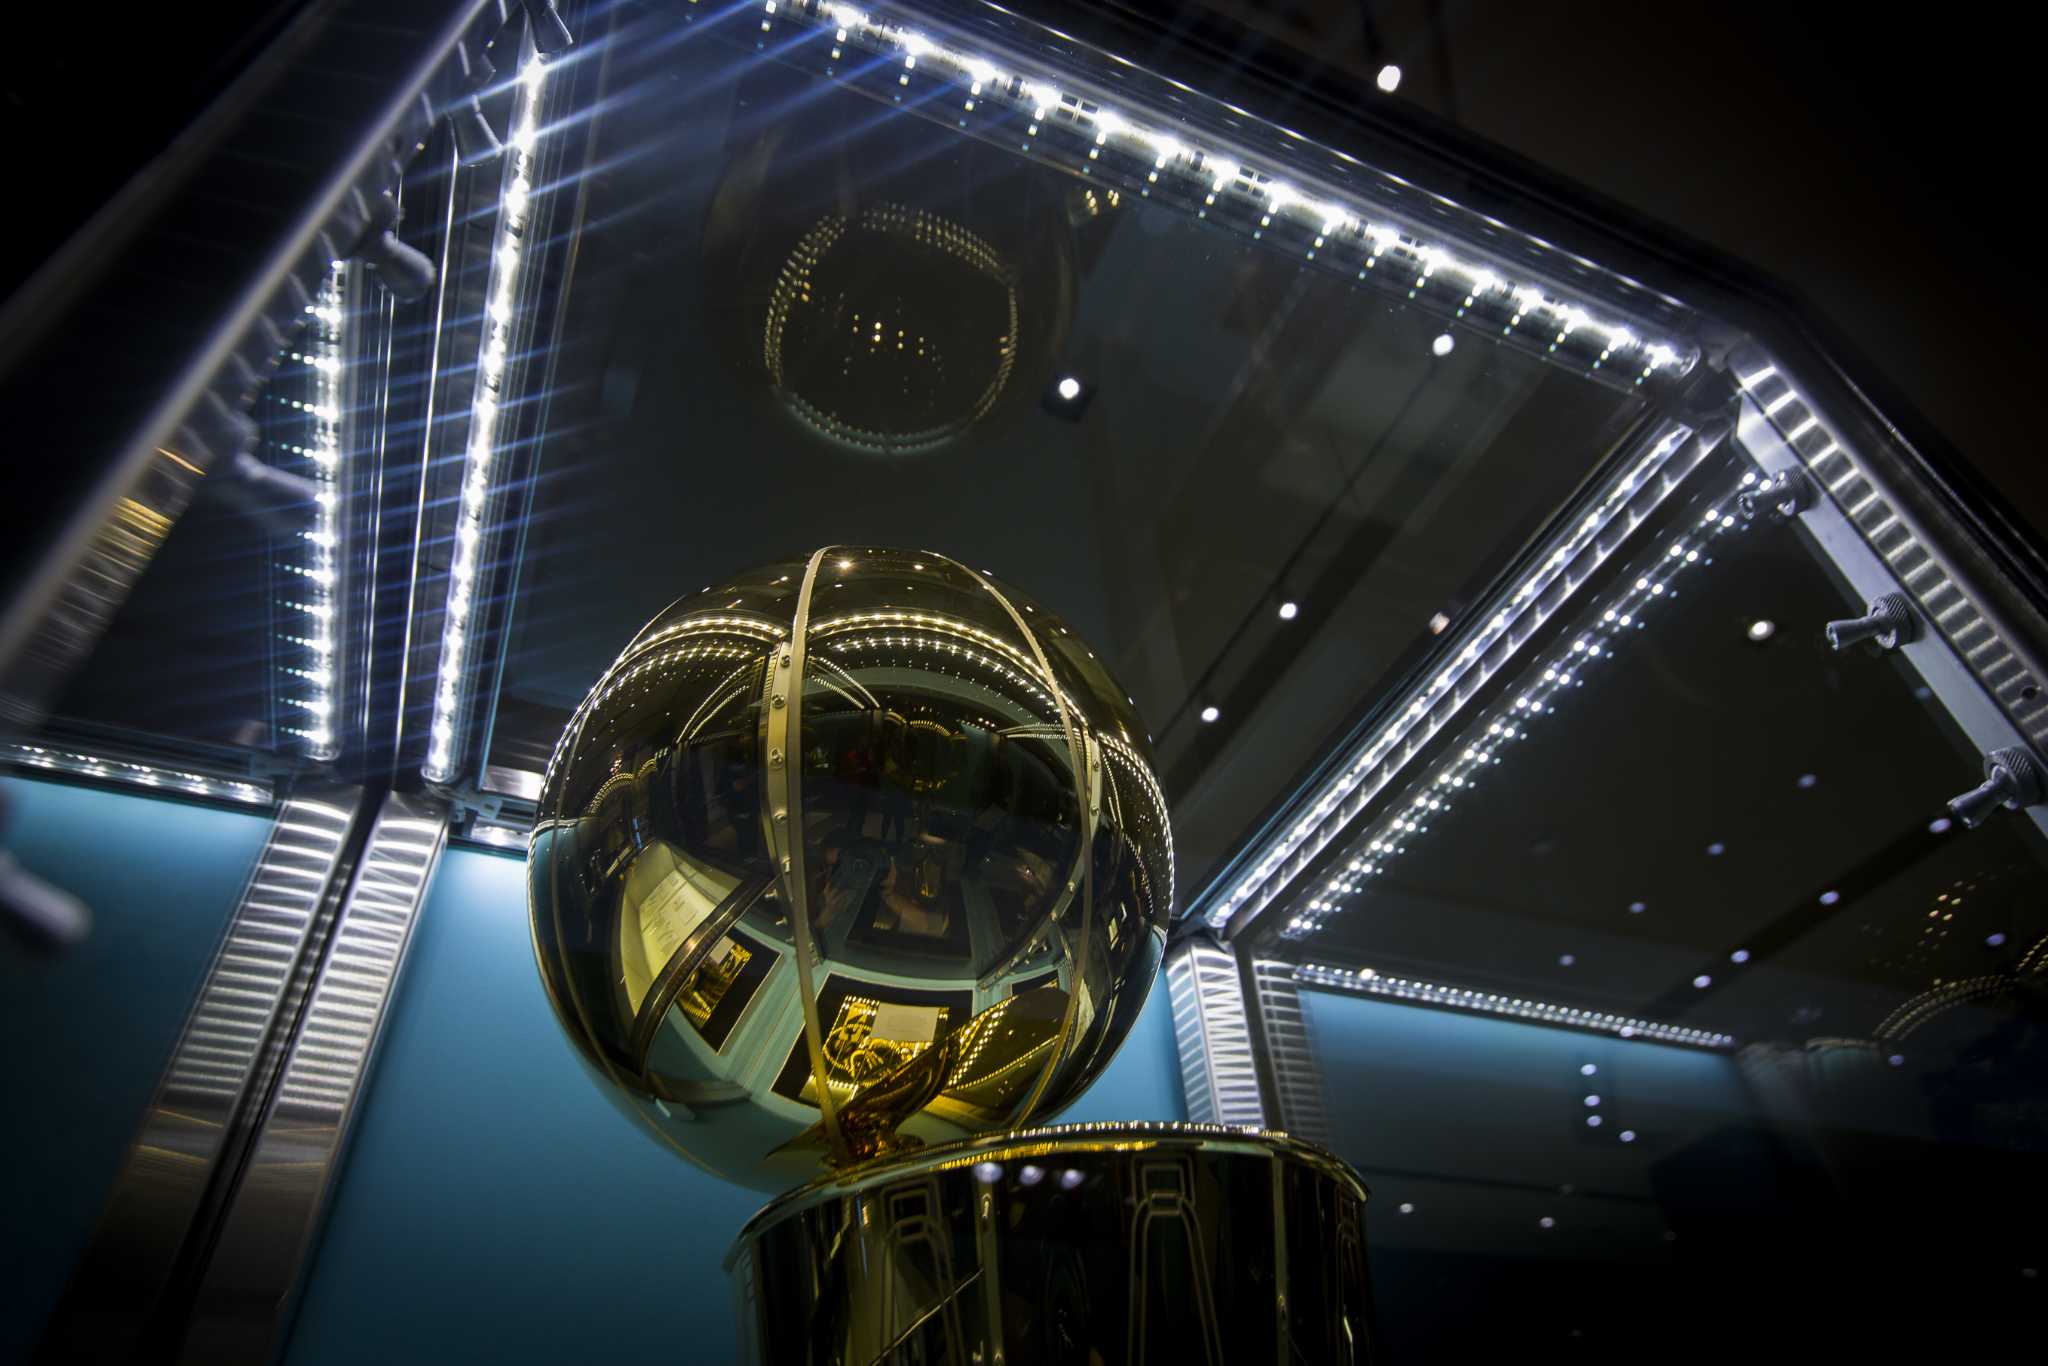 Get a Closer Look at Tiffany & Co.'s Larry O'Brien Trophy for the